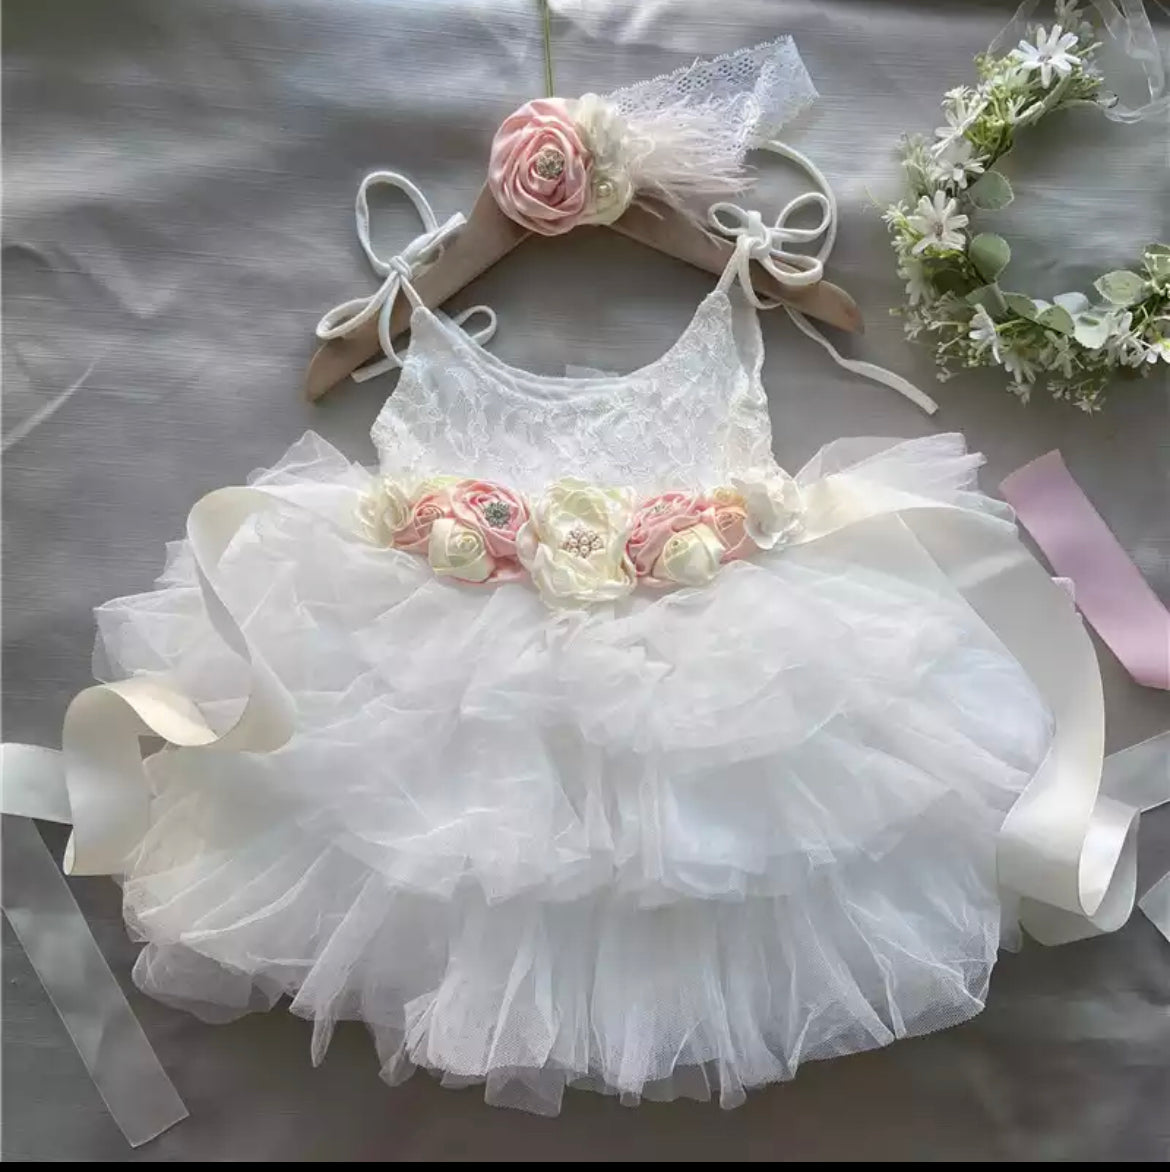 Delilah - Princess Lace & Tulle Dress with Floral Sash + Headband  - Crystal White & Pink.